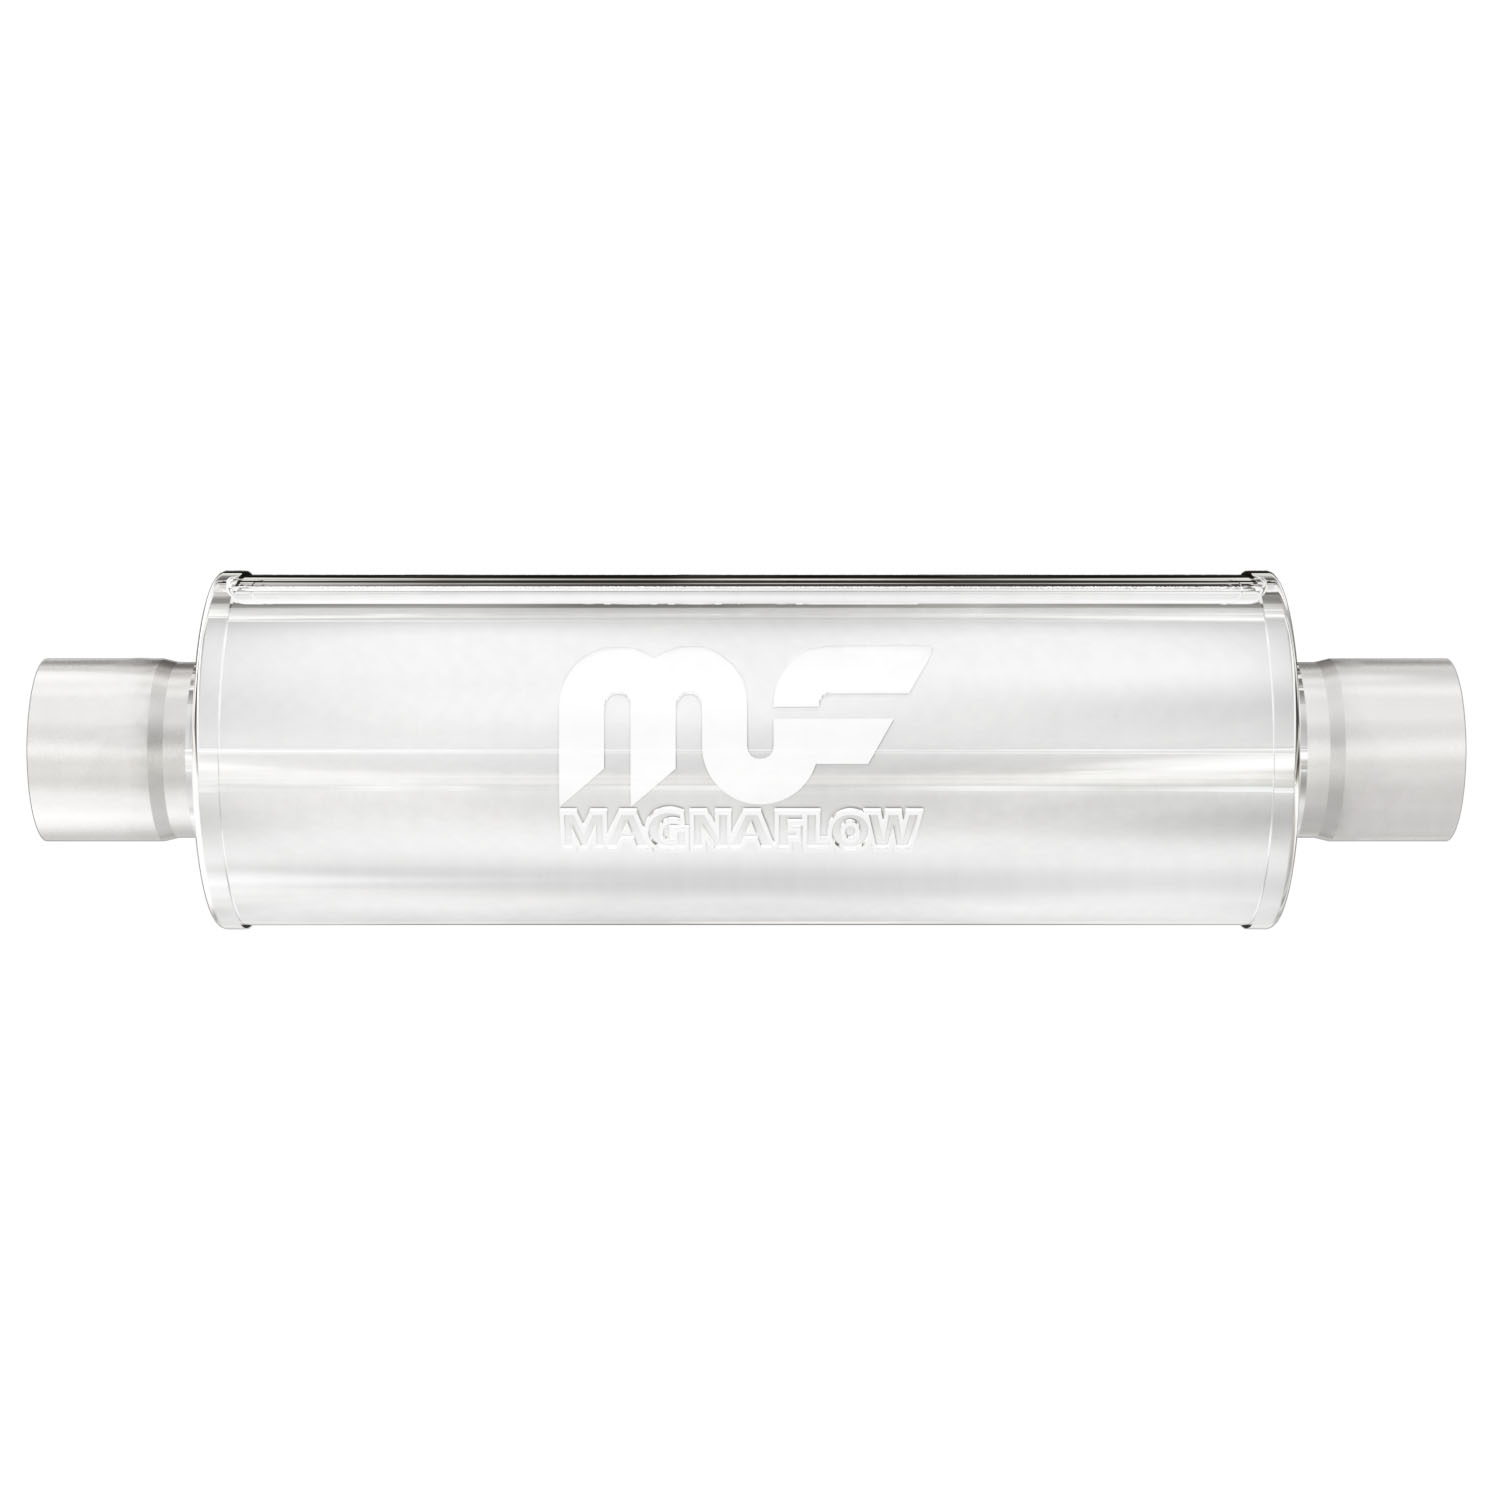 6" Round Muffler Center In/Center Out: 2" Body Length: 14" Overall Length: 20" Core Size: 2.5" Polished Finish